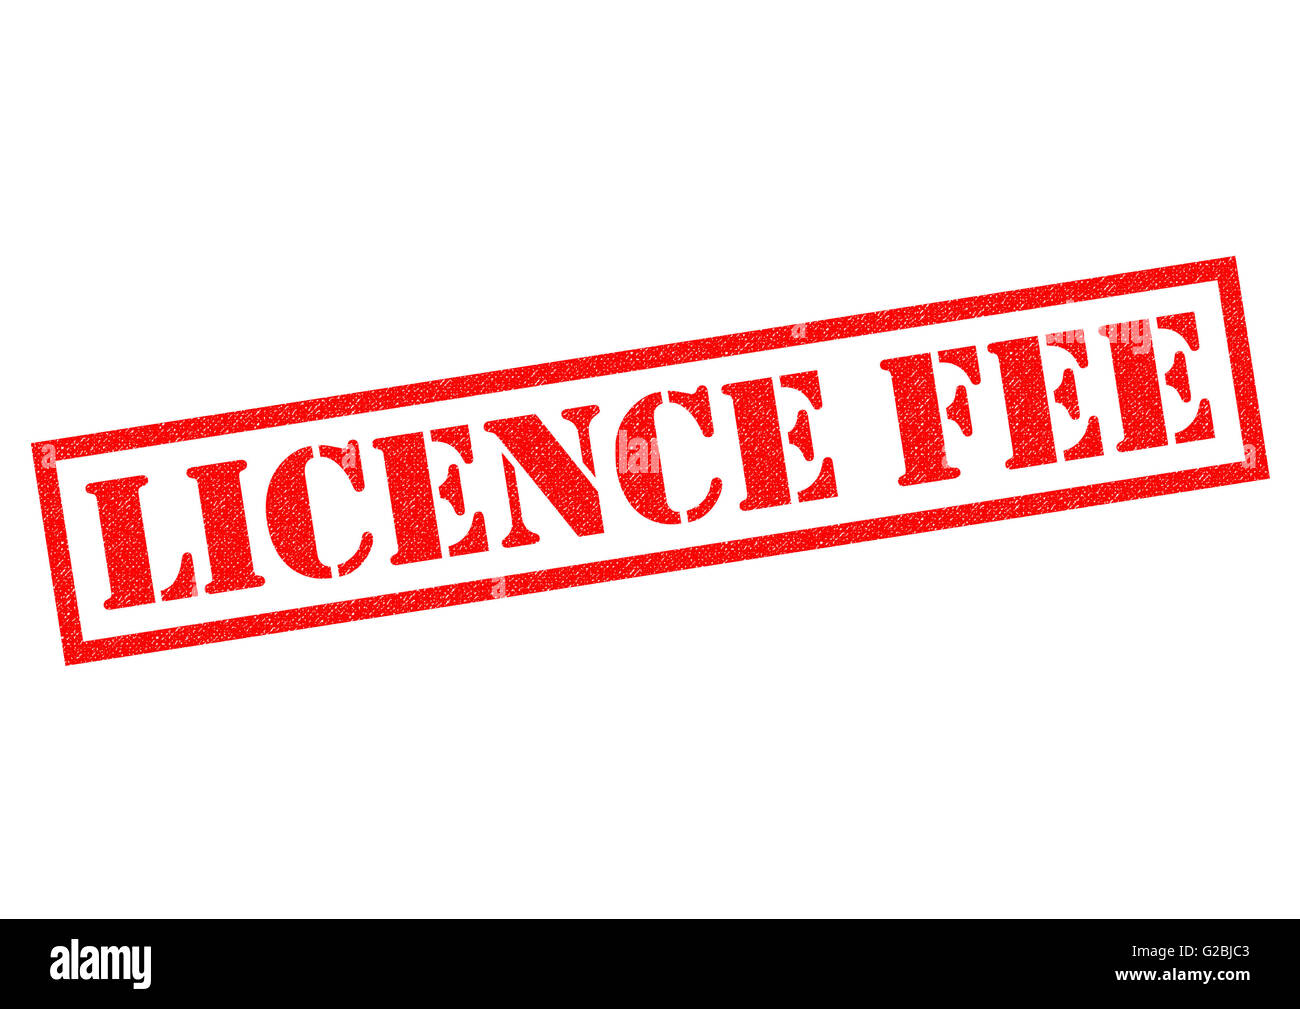 LICENCE FEE red Rubber stamp over a white background. Stock Photo